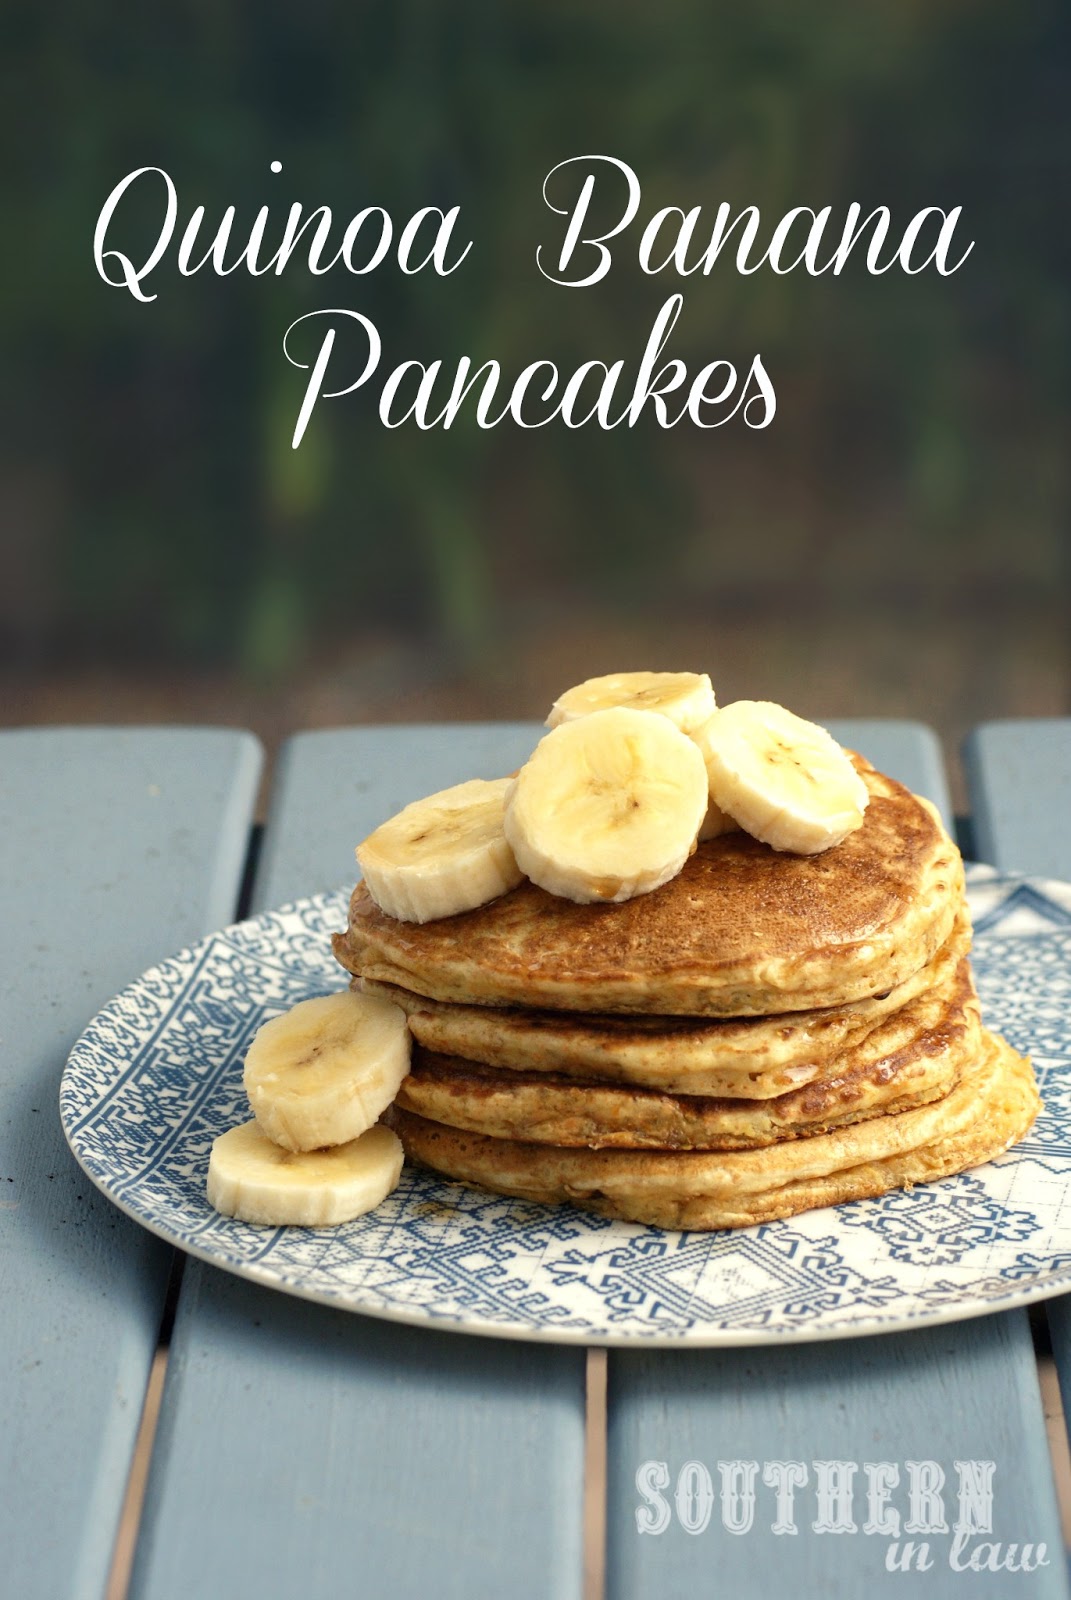 scratch make Law: Pancakes In how from Southern pancakes Quinoa  light Recipe: Banana to